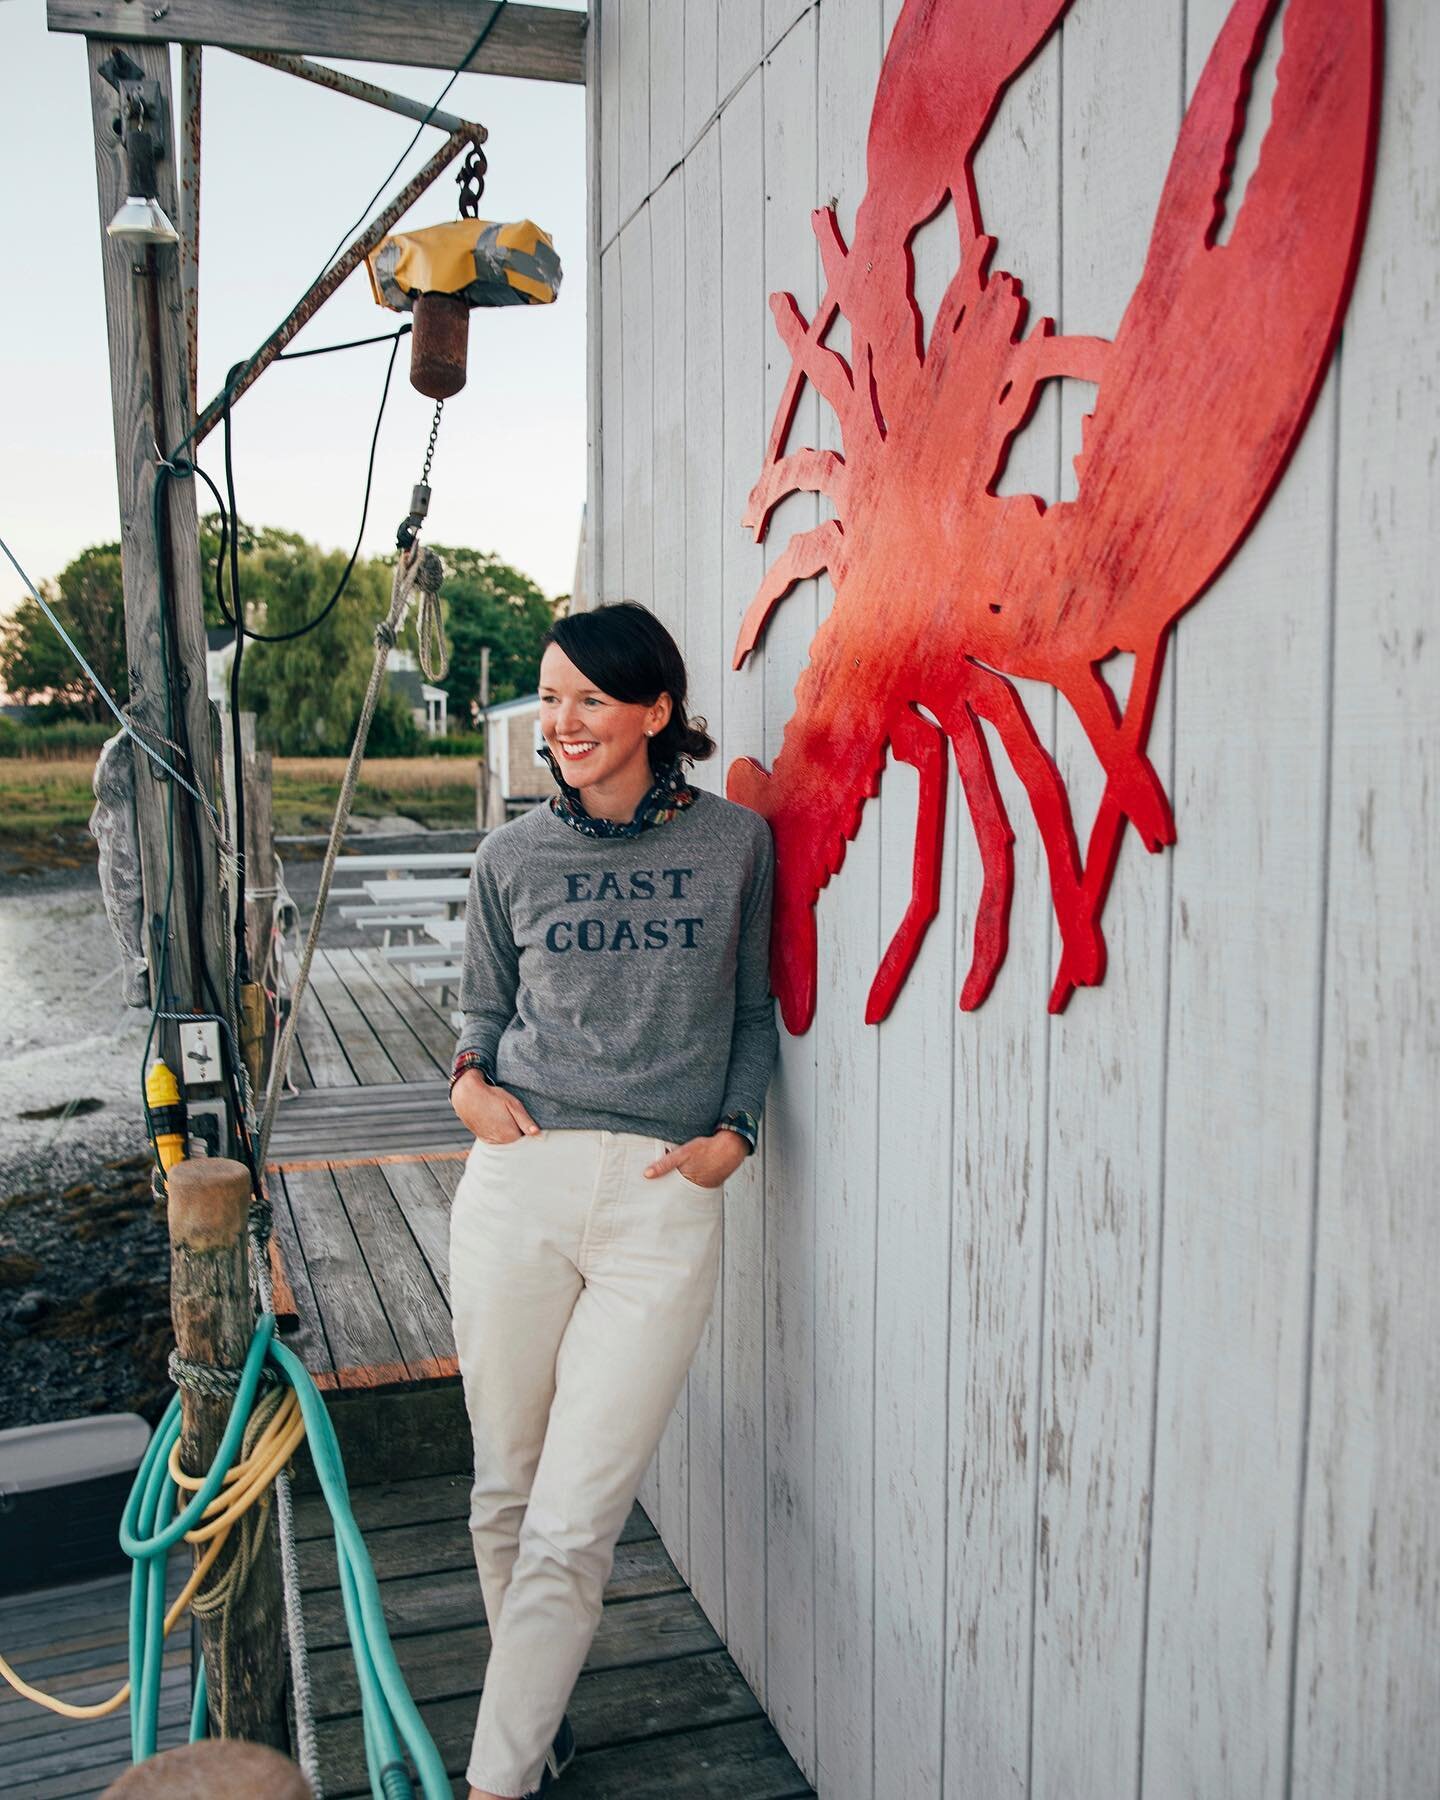 It&rsquo;s the East Coast for me 💙 Excited for cooler temps and layers and loving this lightweight sweatshirt from @saultnewengland, a beloved New England shop with storefronts in Portsmouth and Boston. You can shop all of their local merch online, 